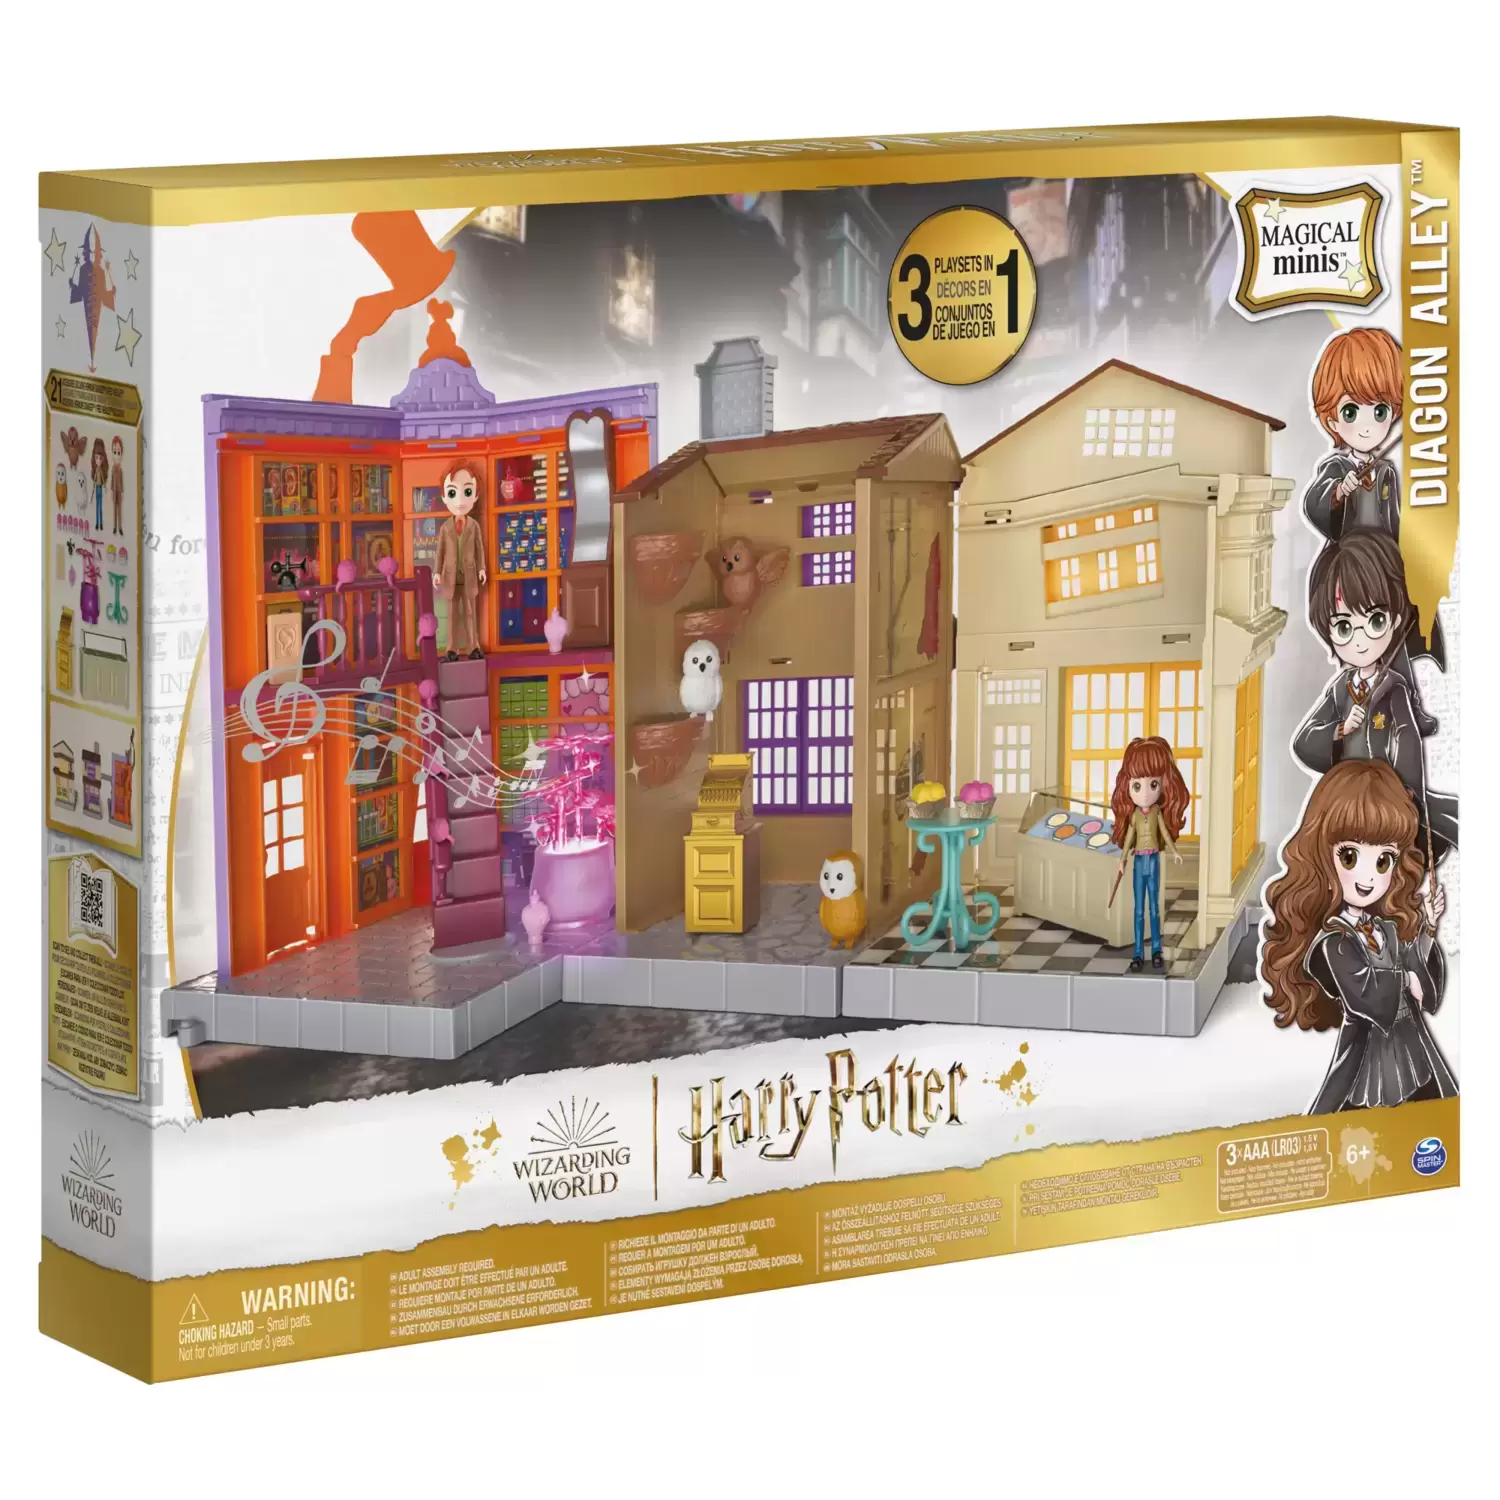 Diagon Alley - Harry Potter Magical Minis action figure